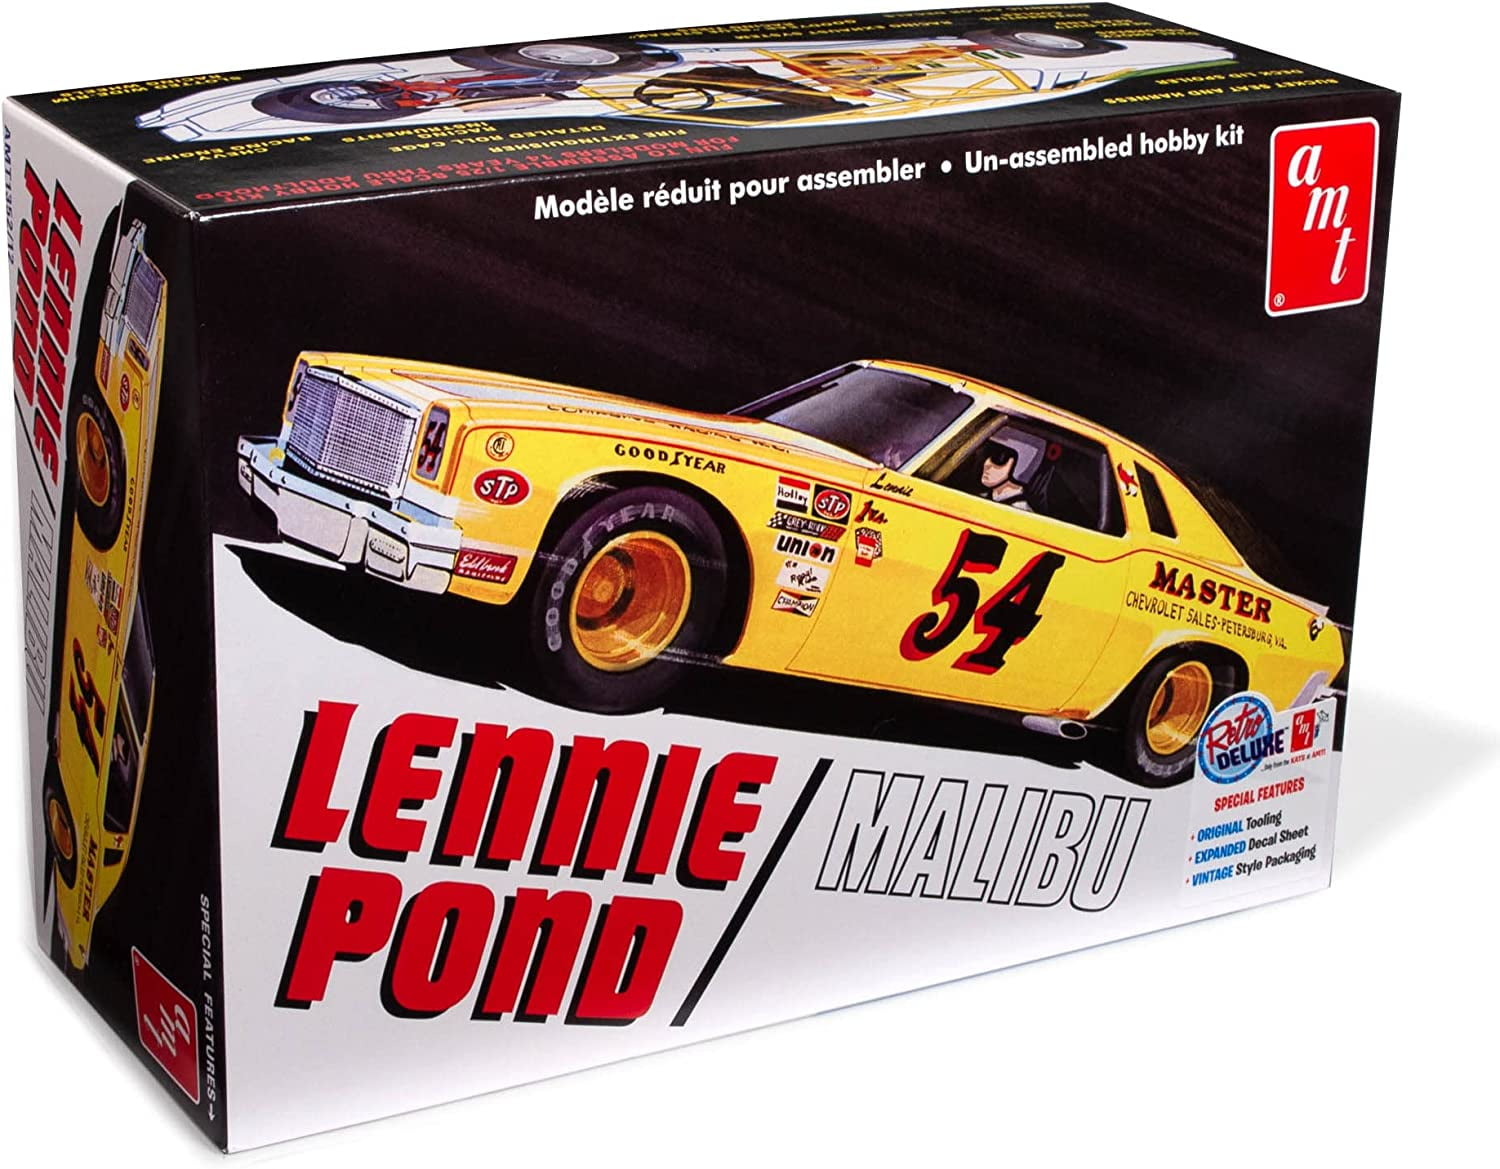 Picture of AMT AMT1352 Skill 2 Model Kit 1974 Chevrolet Malibu Stock No.54 Lennie Pond 1 by 25 Scale Model Car